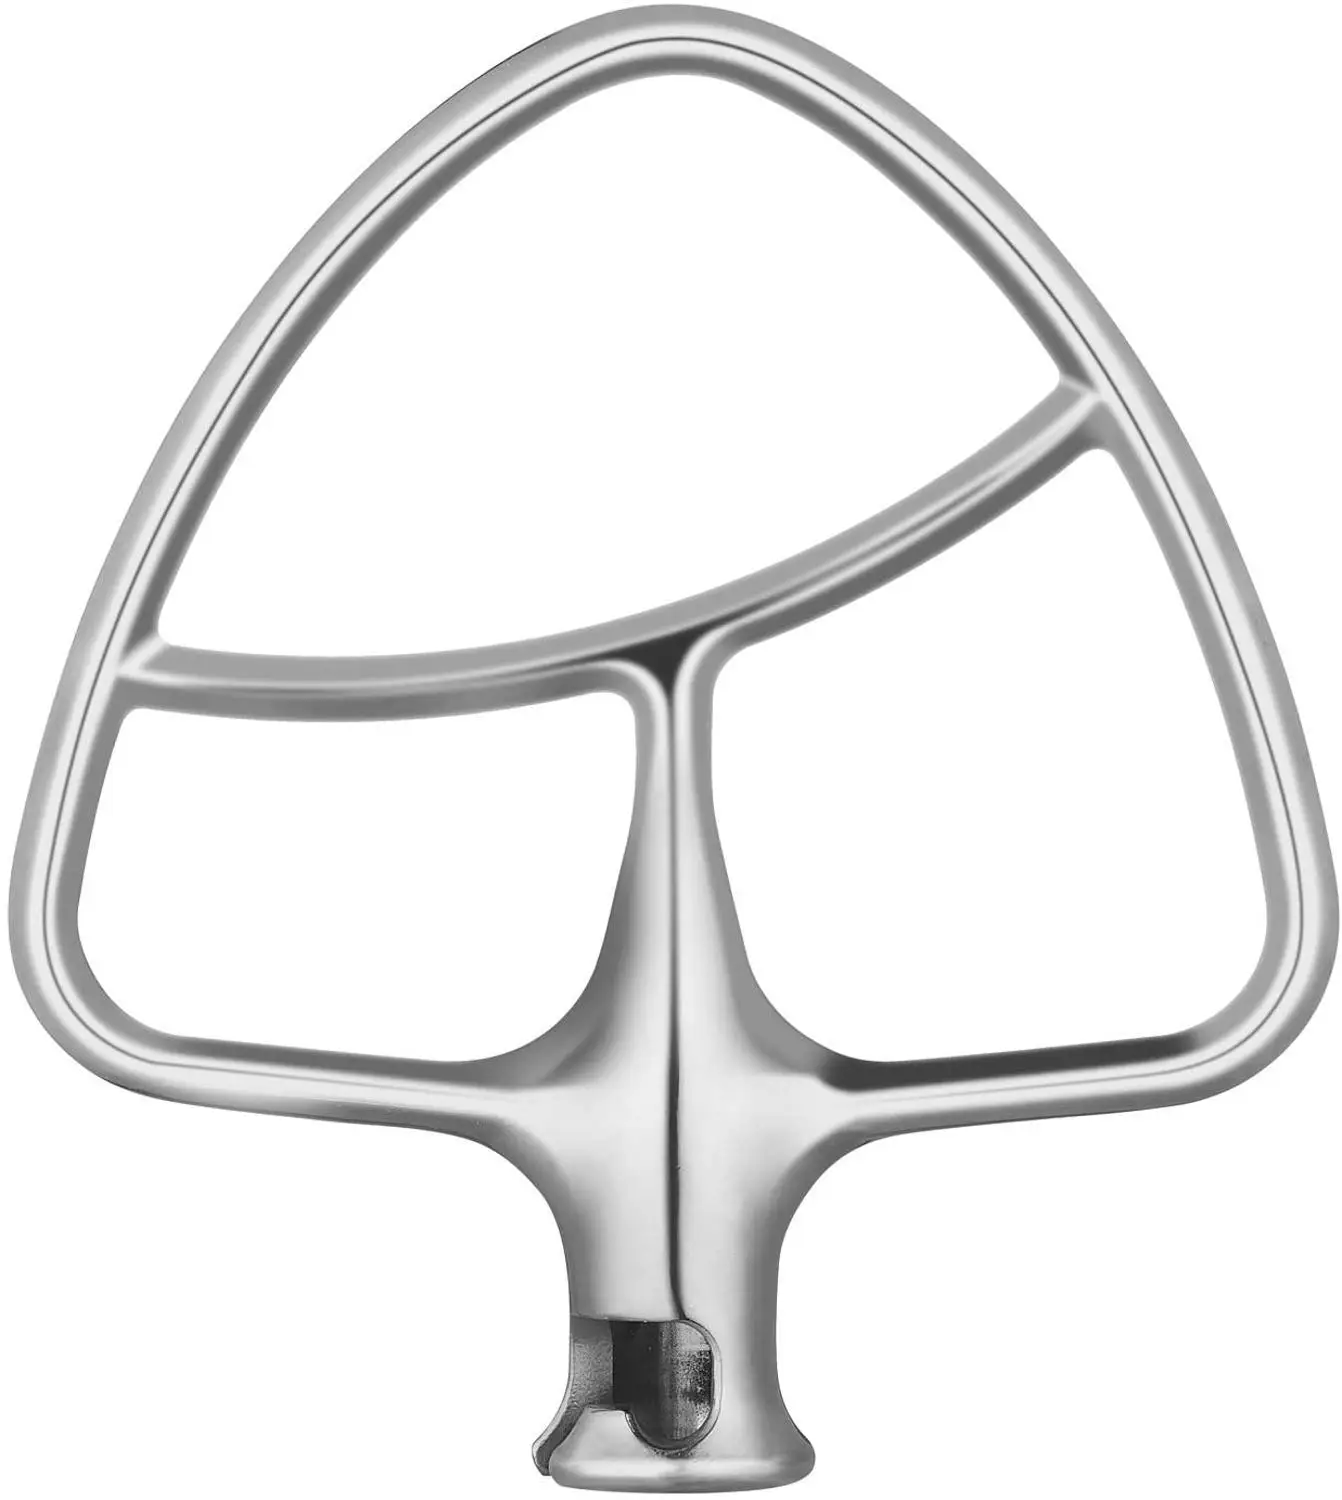 LEDACE Polished Stainless Steel Flat Beater for KitchenAid 5Q Tilt-Head Stand Mixers, Mixing Parts Attachments Dishwasher